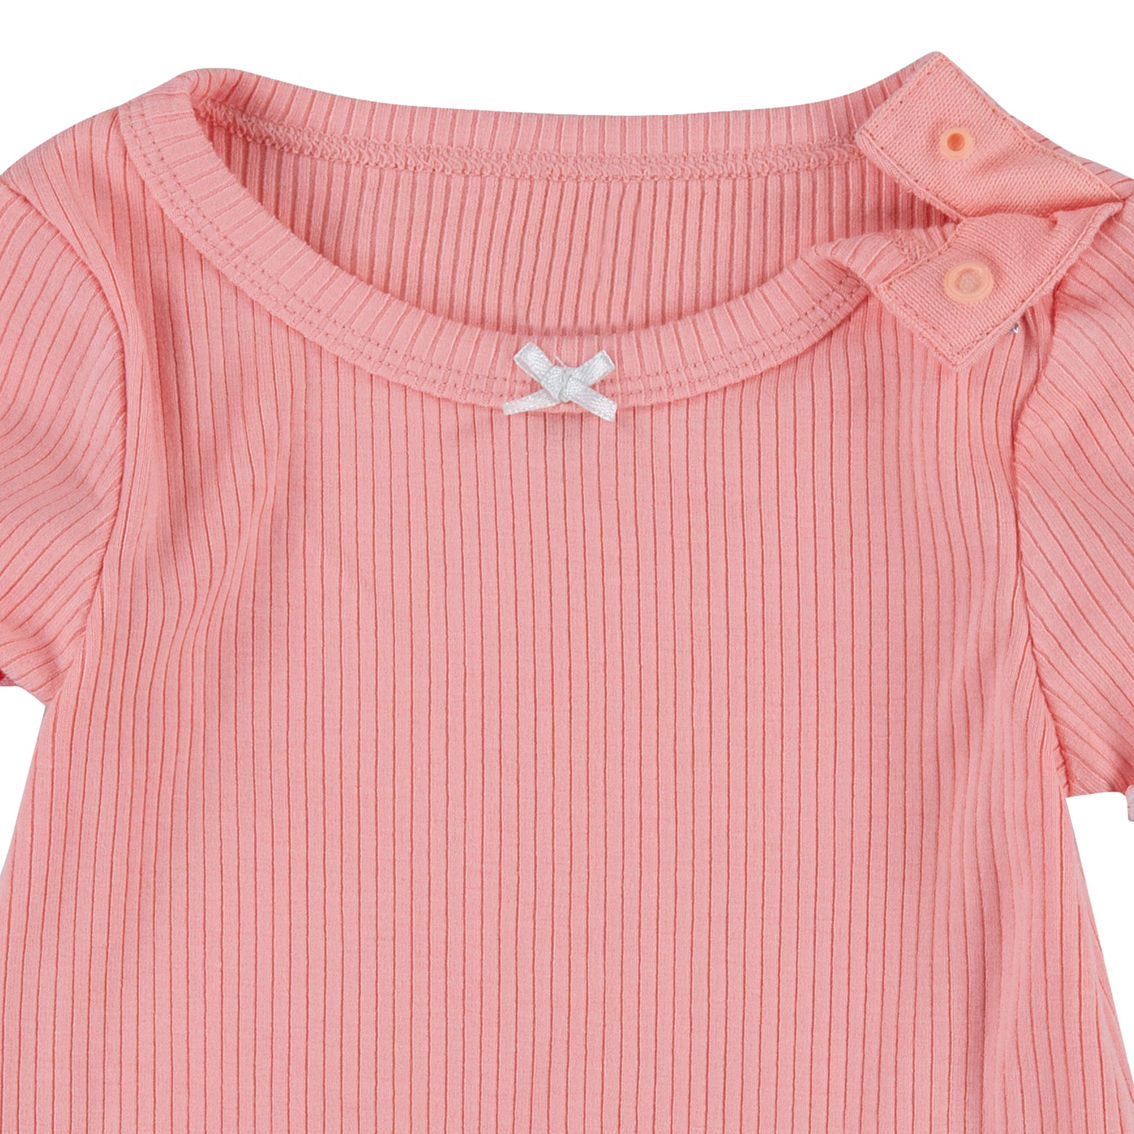 Levi's Baby Girls Tee and Skirtall 2 pc. Set - Image 3 of 4